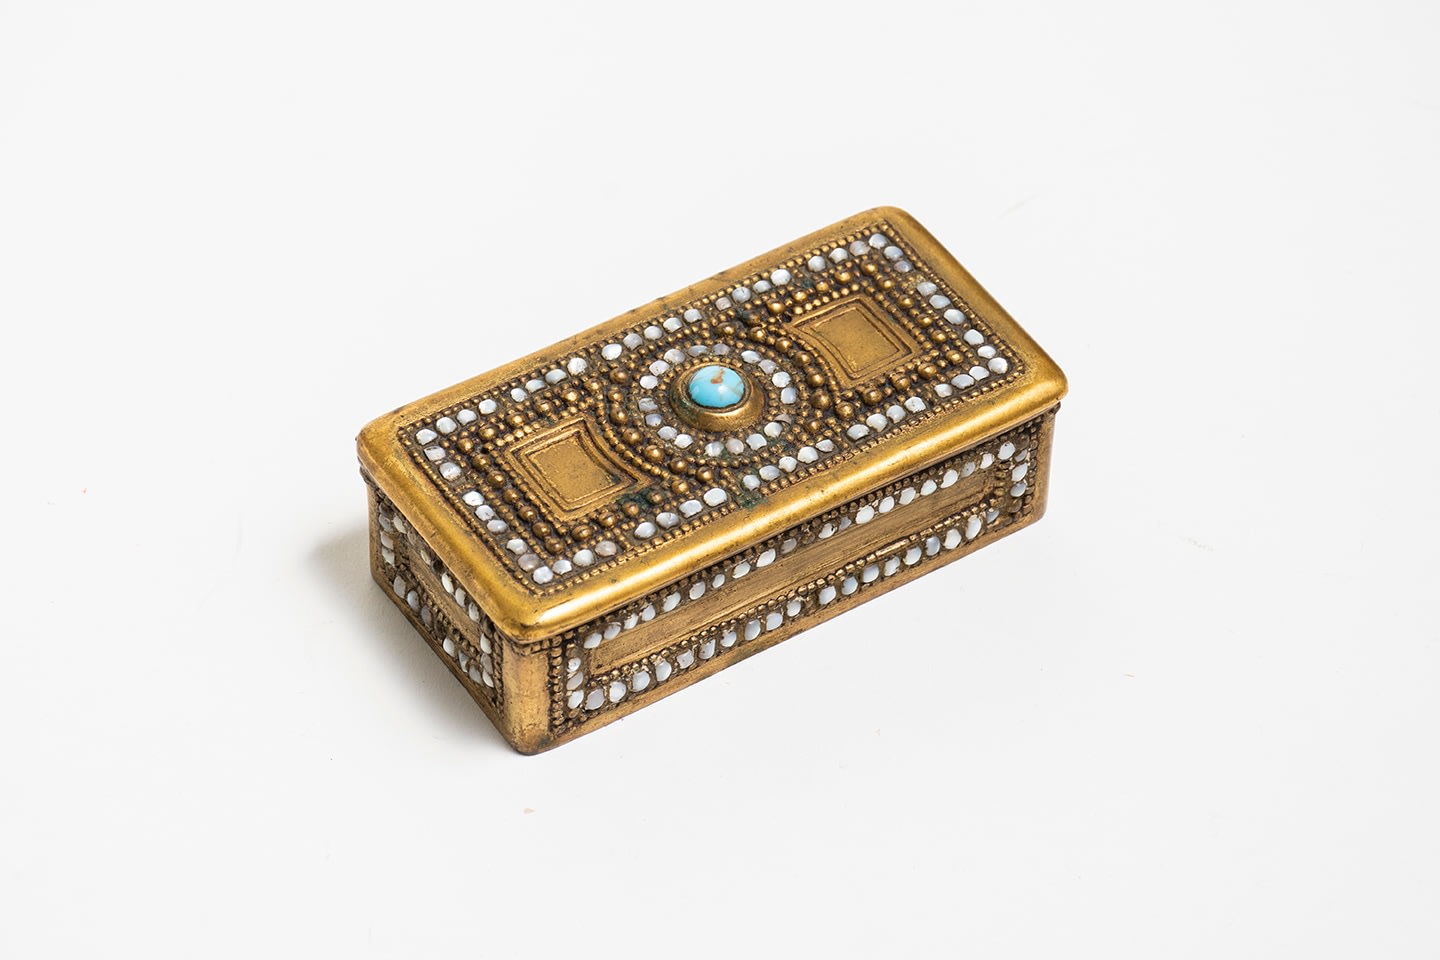 A small rectangular gilt bronze stamp box with raised beading on the flat lid, with small inset pieces of iridescent white mother of pearl and a glass bead at the center in teal glass with brown swirls meant to recreate a piece of turquoise.